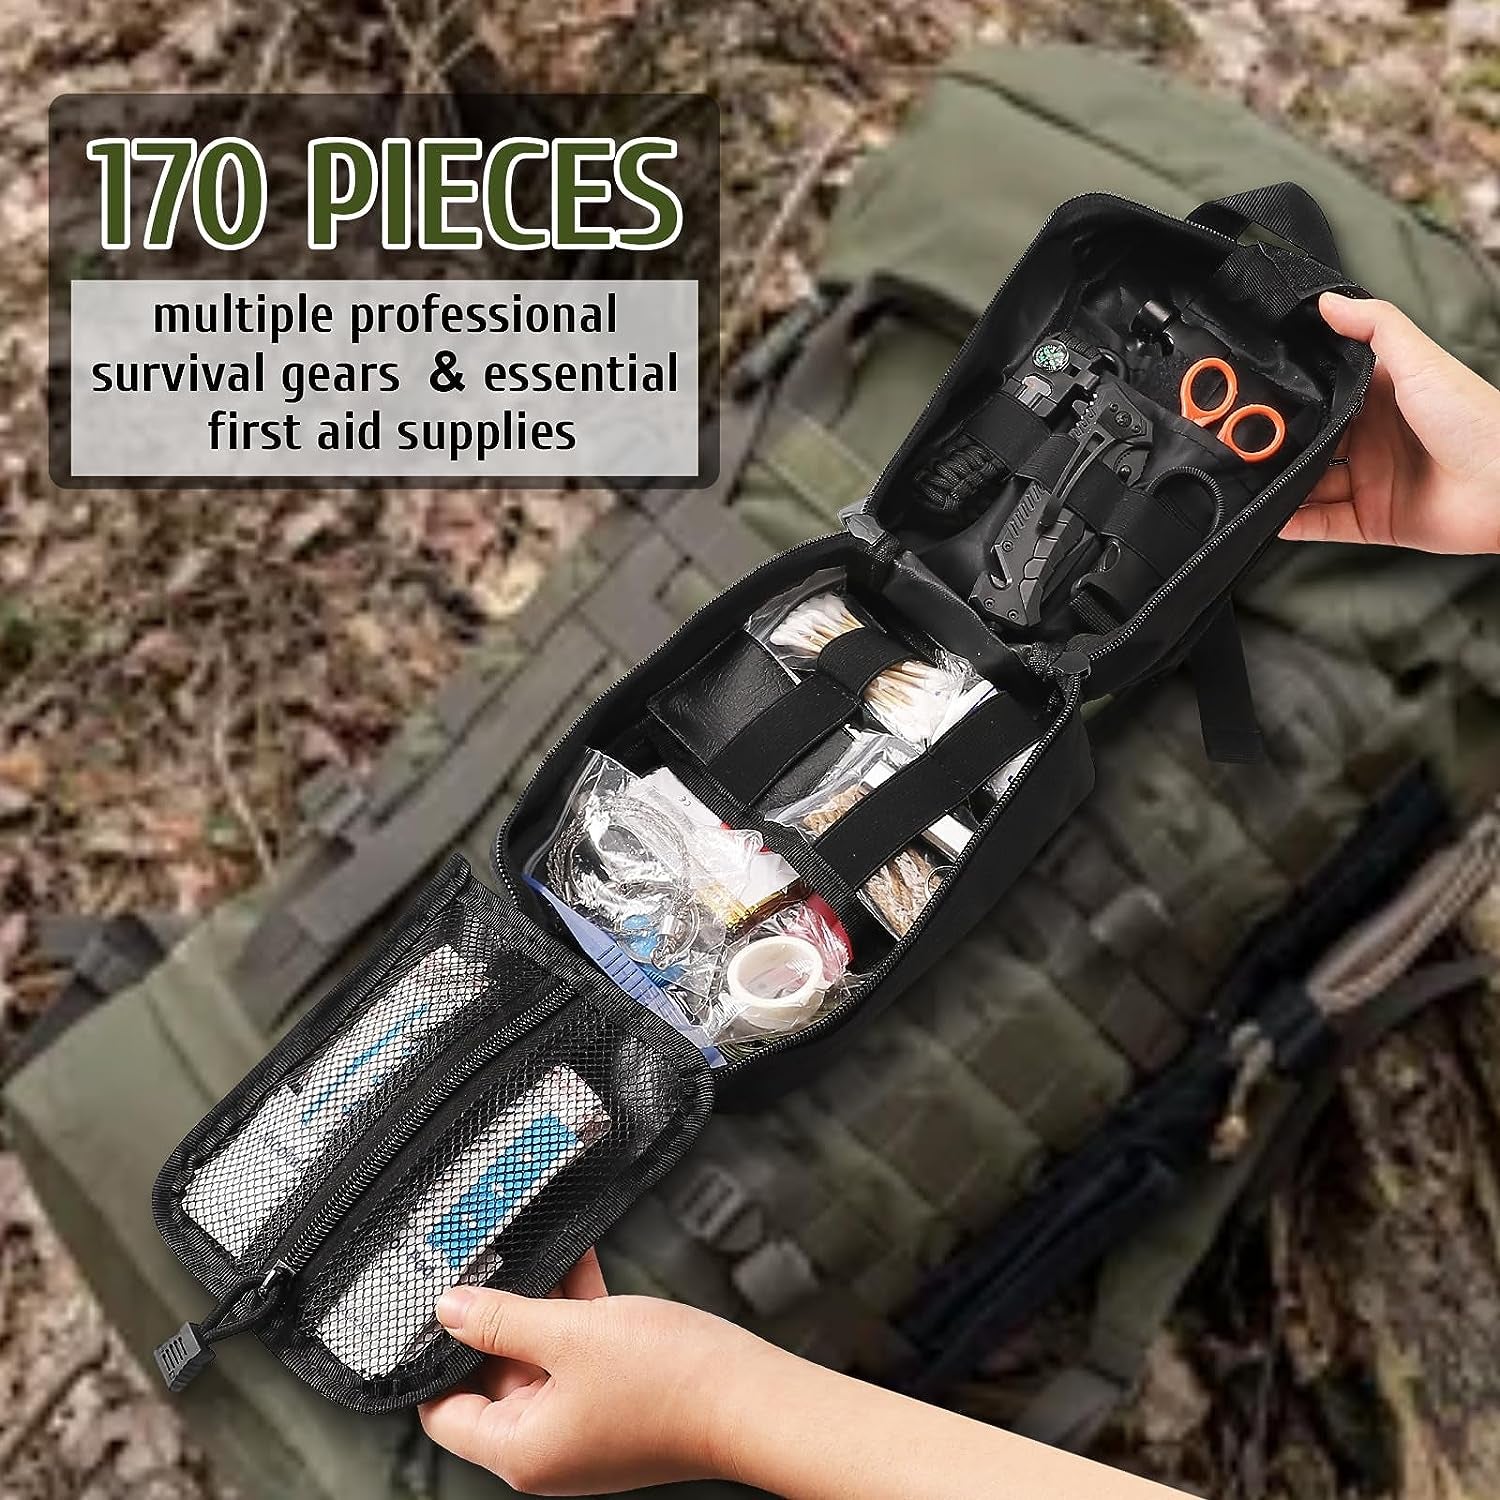 170 PCS Survival First Aid Kit, Tactical Trauma Kit with Essential Gear Emergency Medical Supplies for Hiking Camping Backpacking Outdoor Adventure(Black)